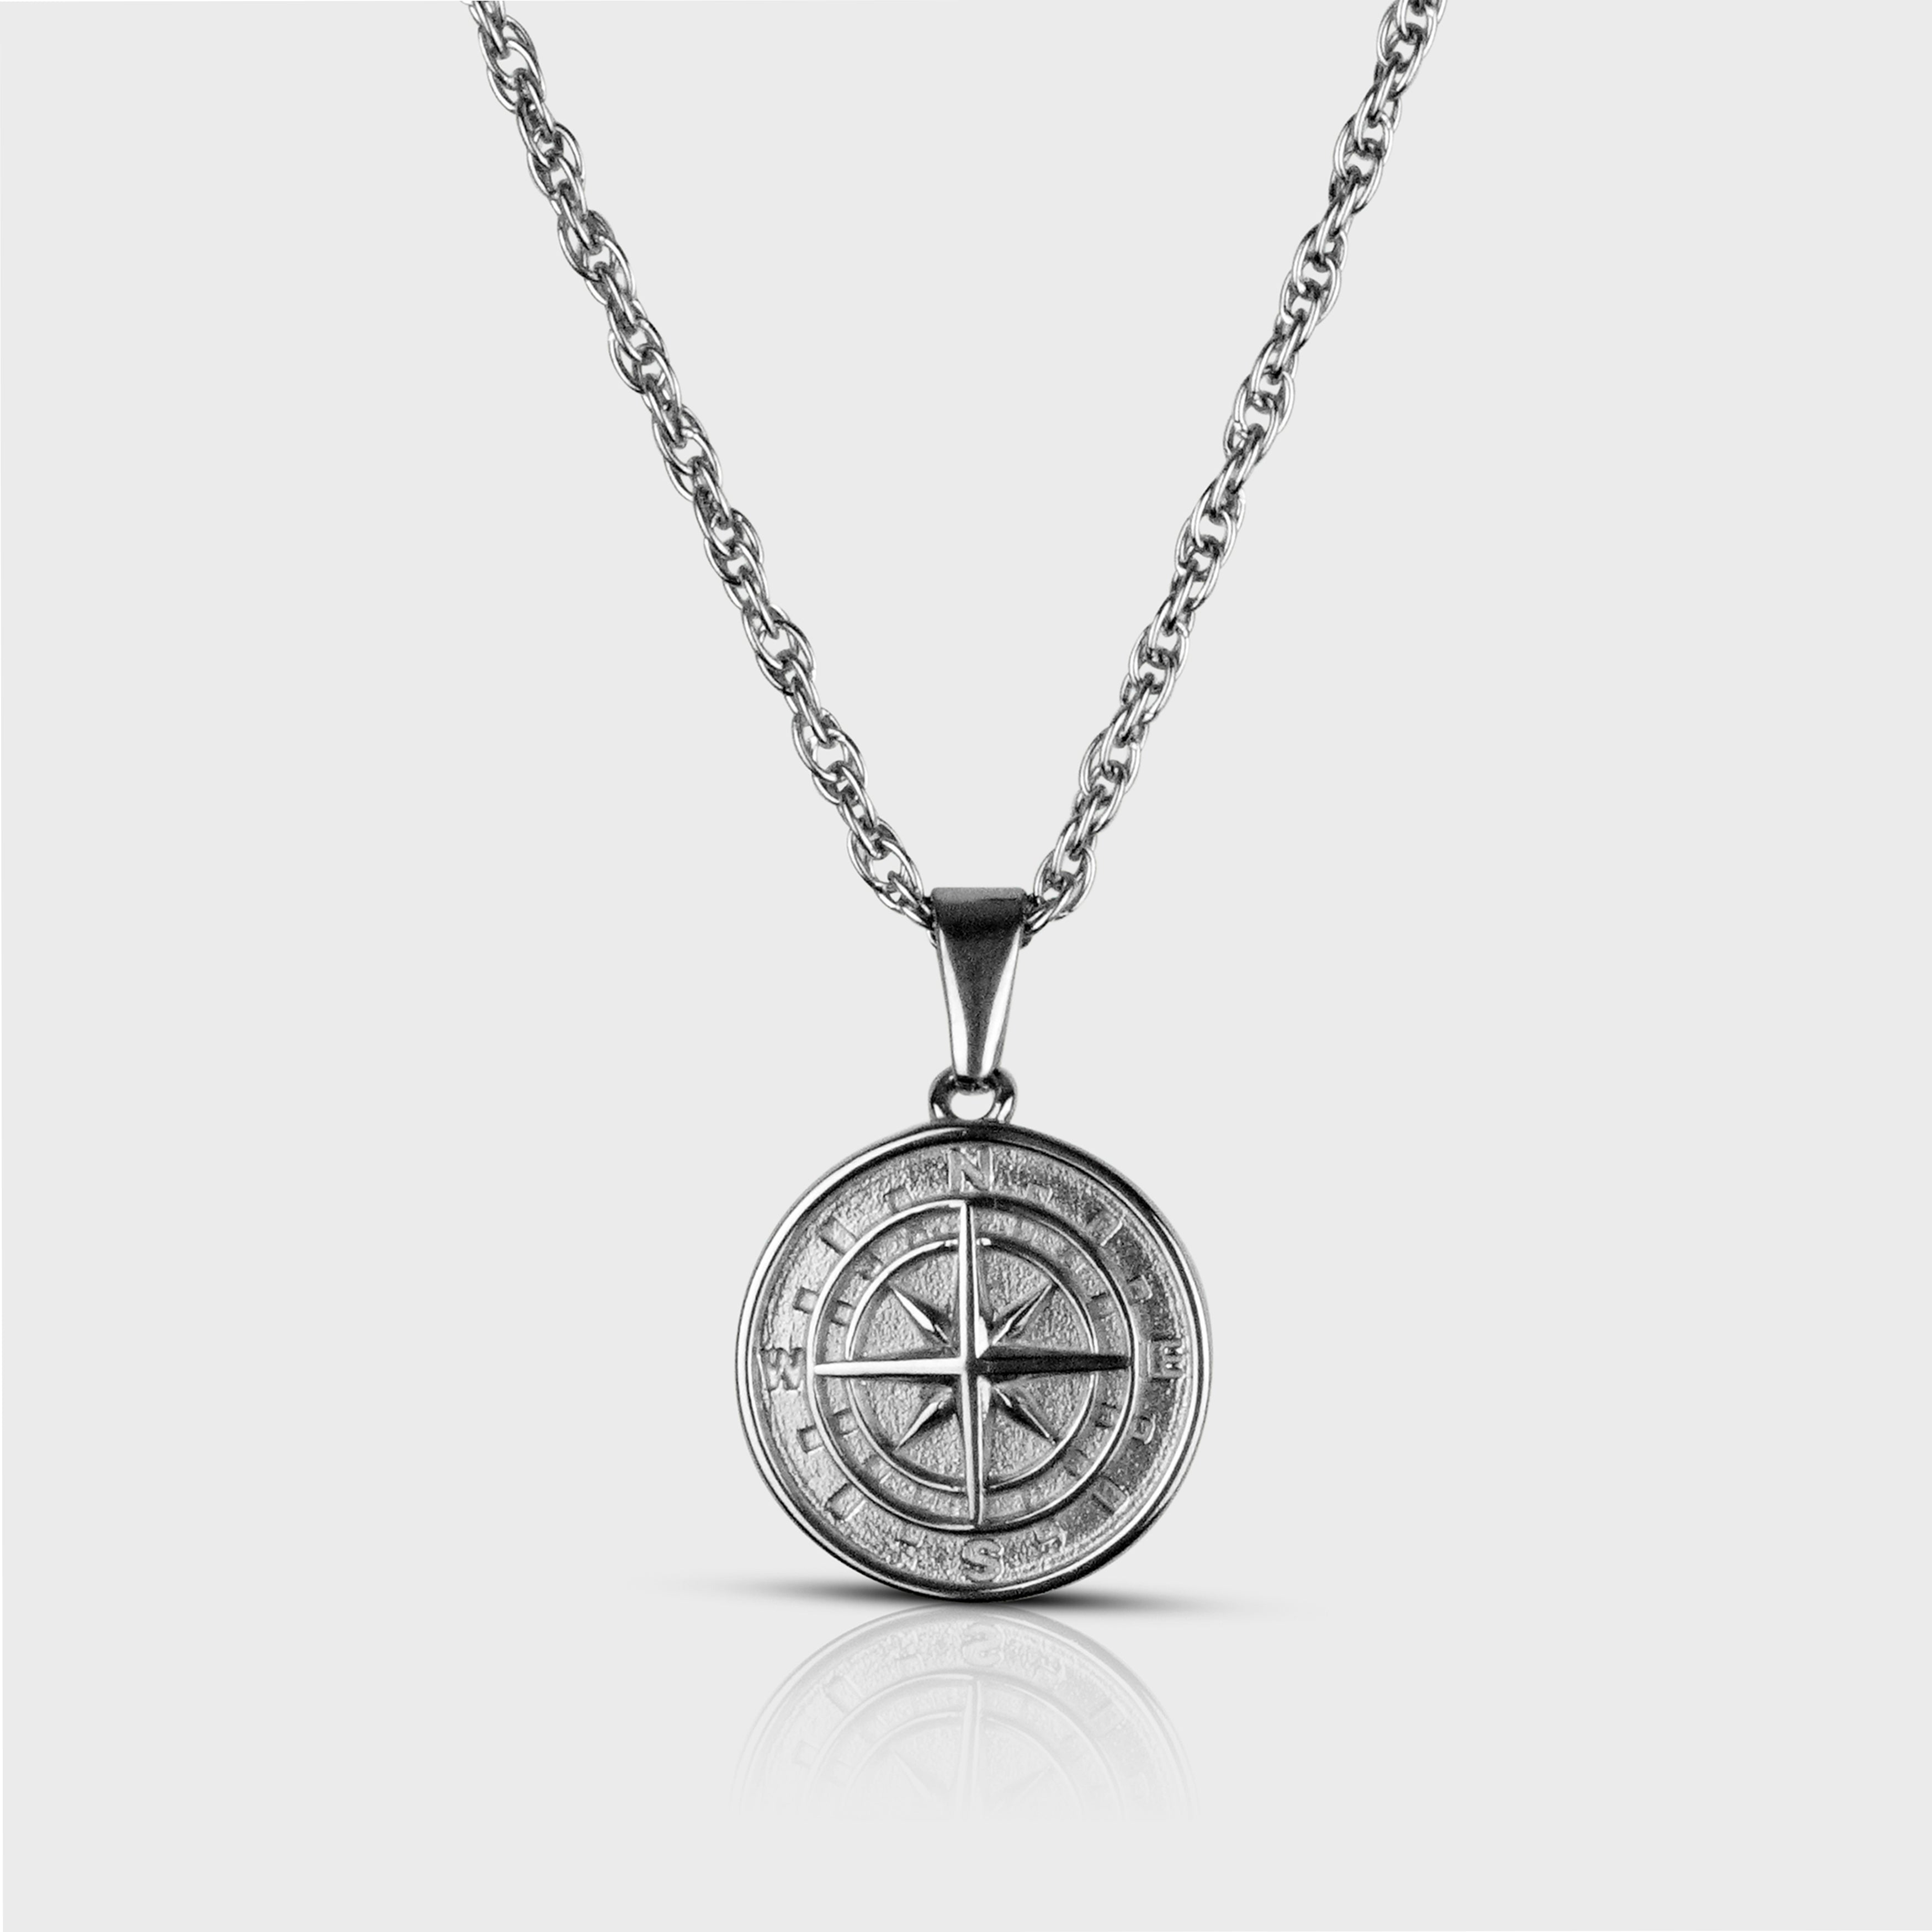 COMPASS NECKLACE - SILVER TONE